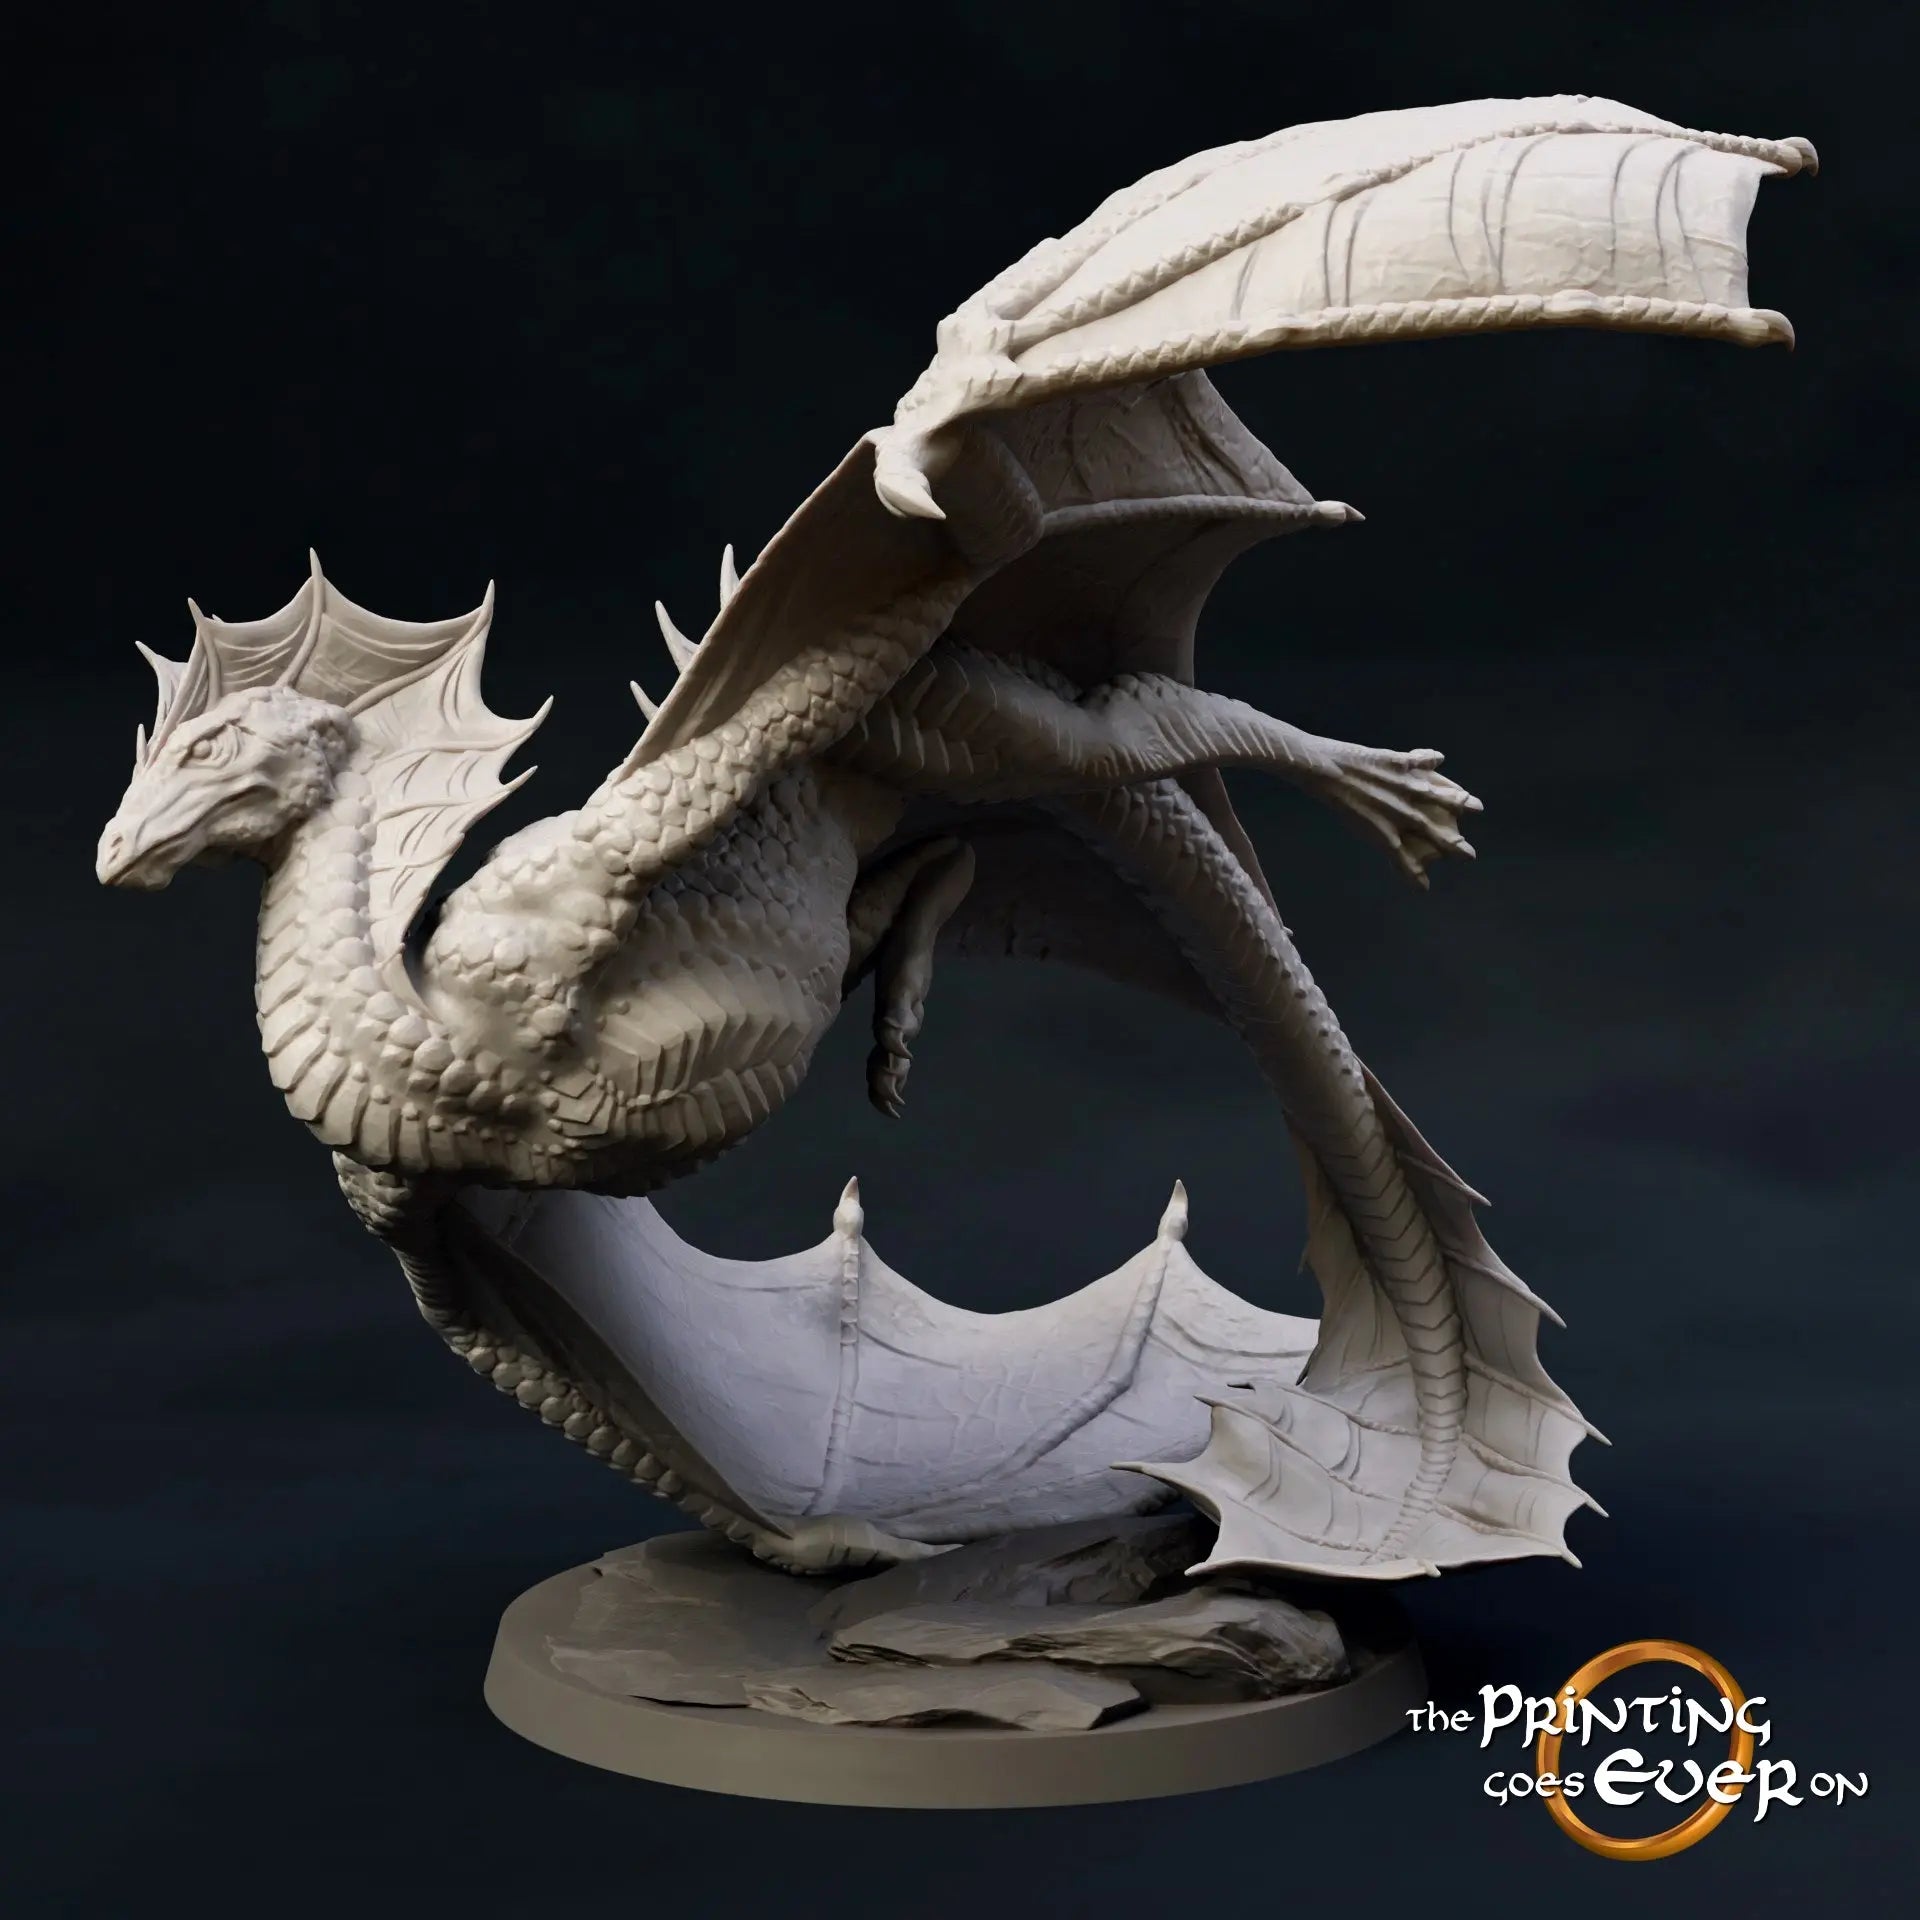 Wyvern The Printing Goes Ever On